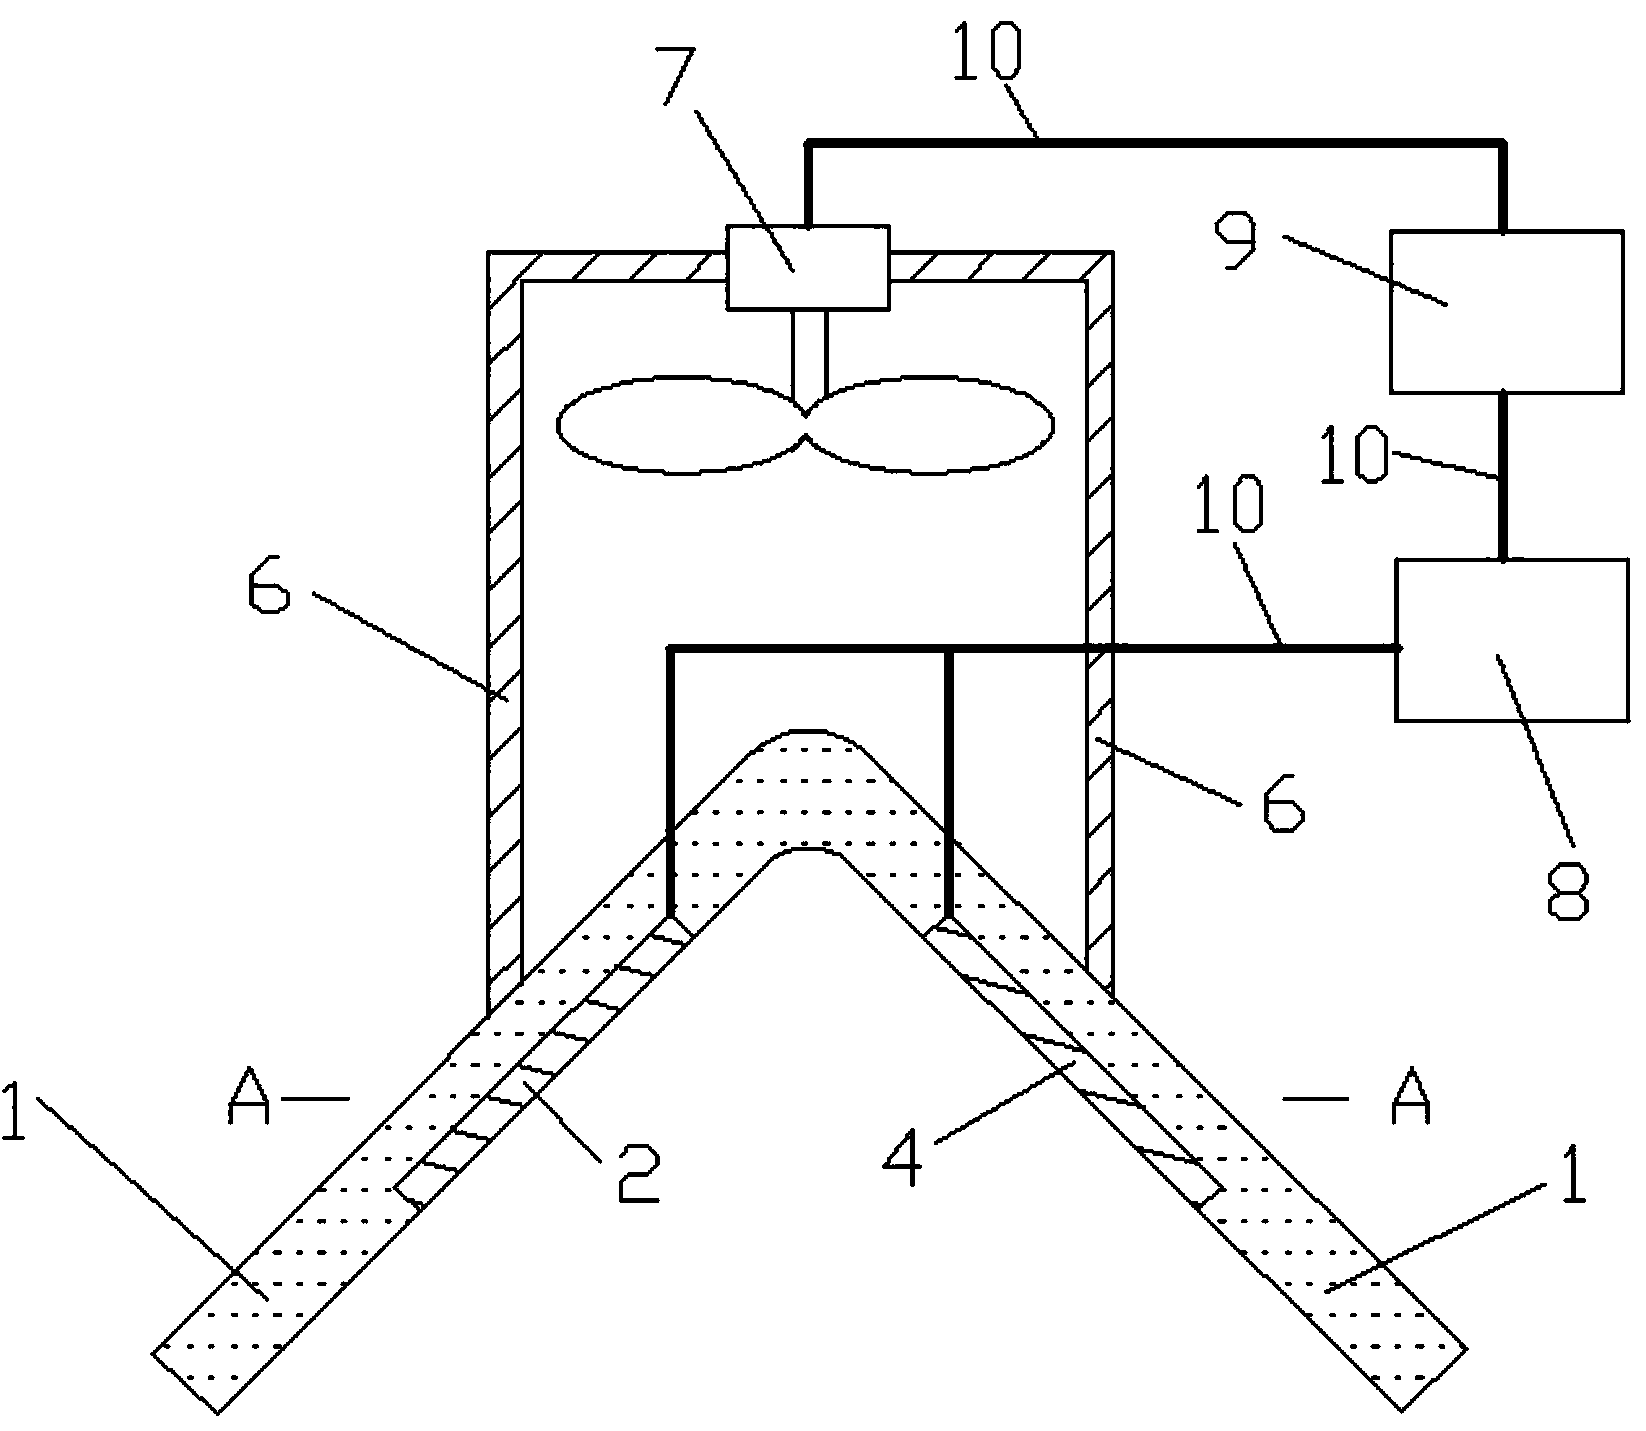 Embedded type heat dissipation system of projector